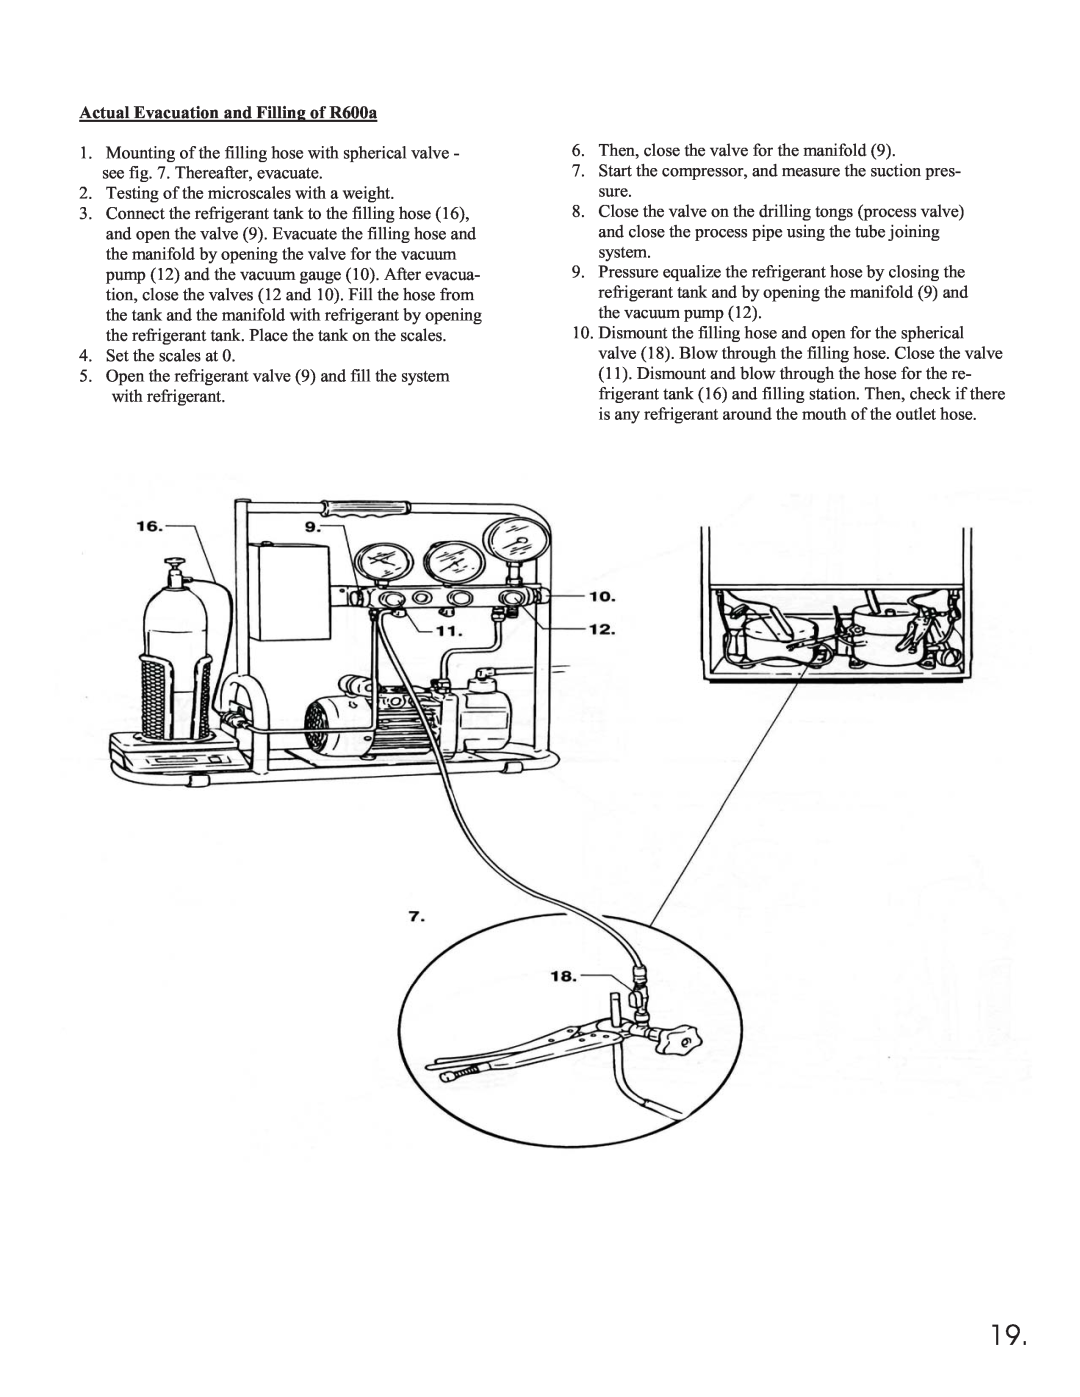 Equator 375 service manual Actual Evacuation and Filling of R600a 